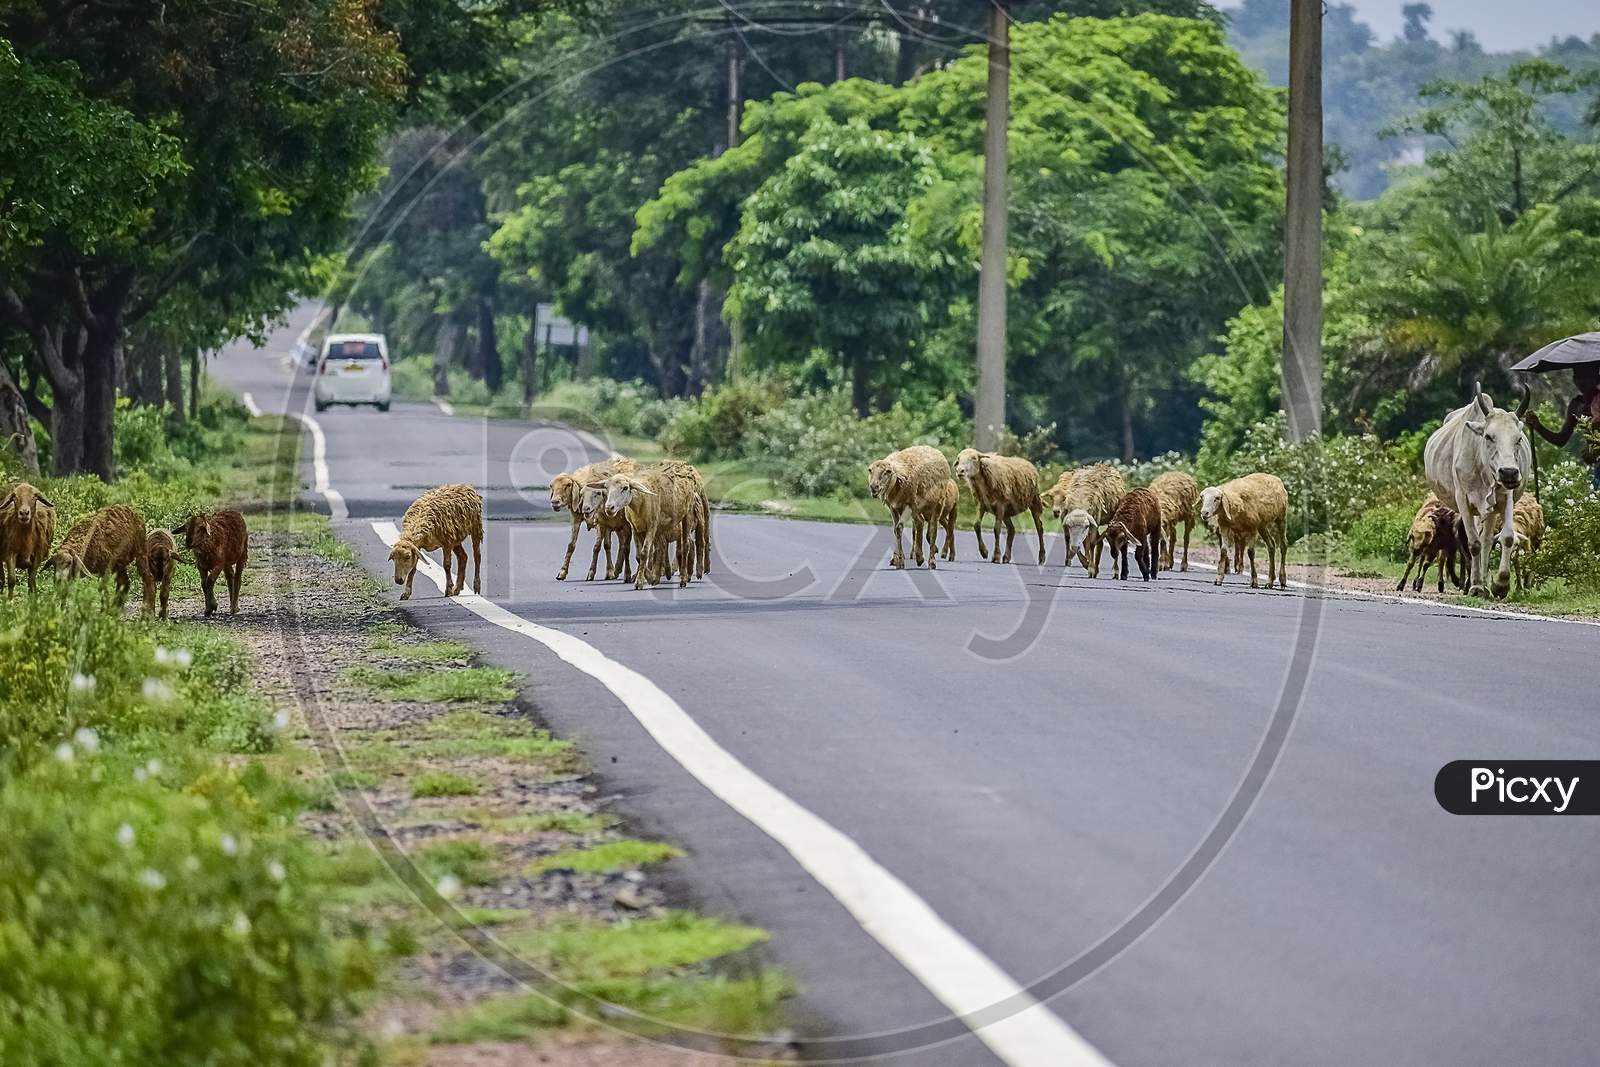 A Flock Of Sheep Crossing A Asfalt Or Tar Made Road In A Line Arranged Following The Leader One. India. Asia. 2019.